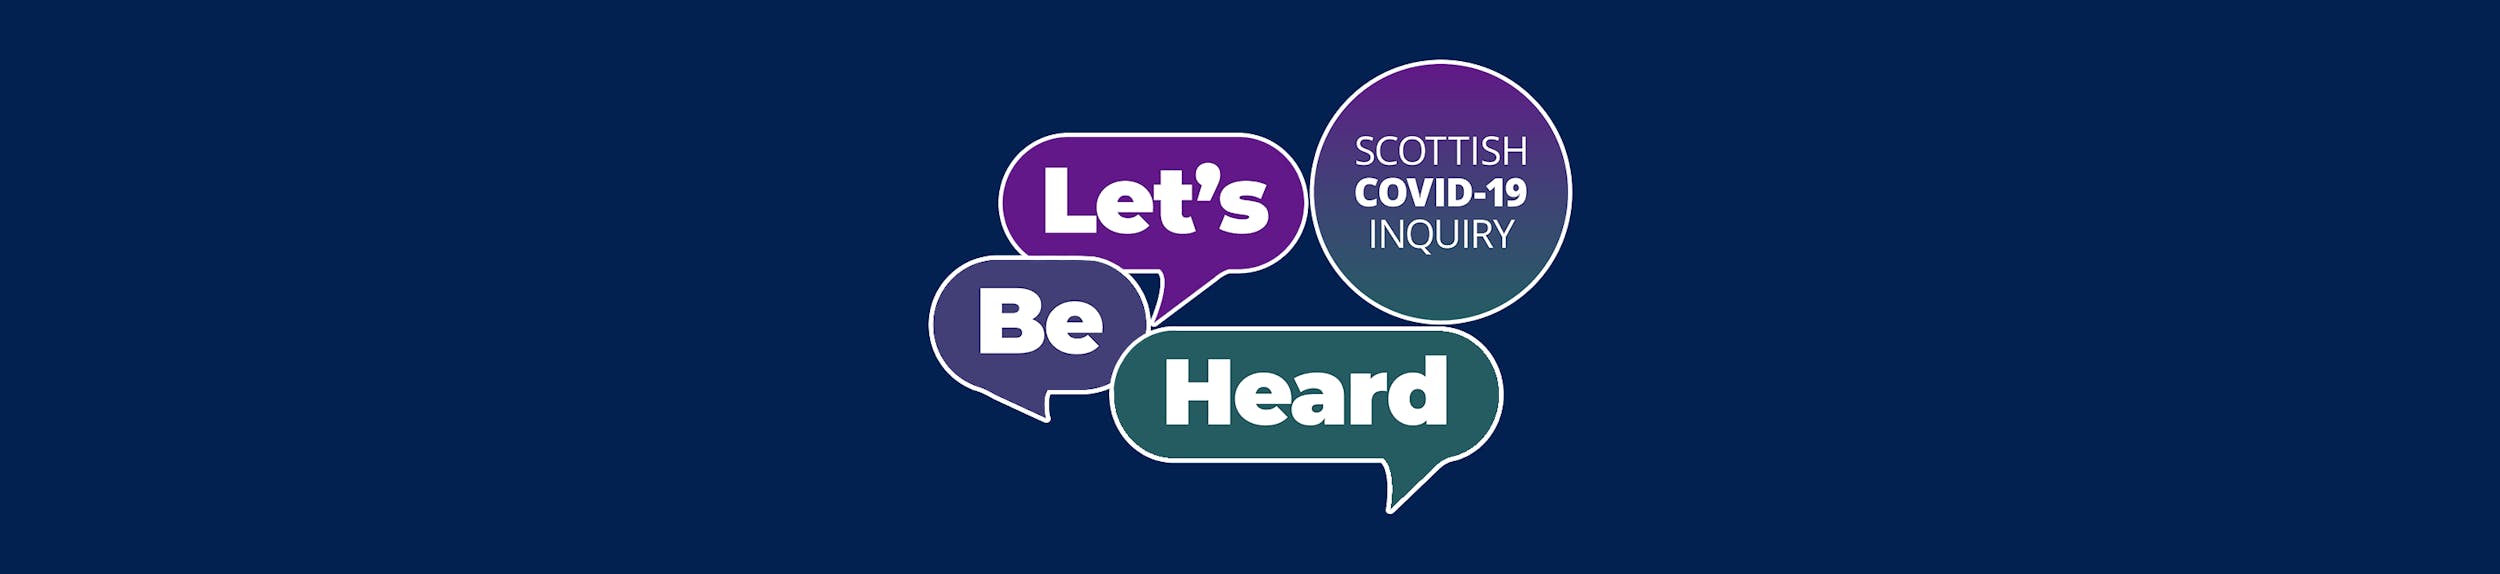 Let's Be Heard, part of the Scottish COVID-19 Inquiry